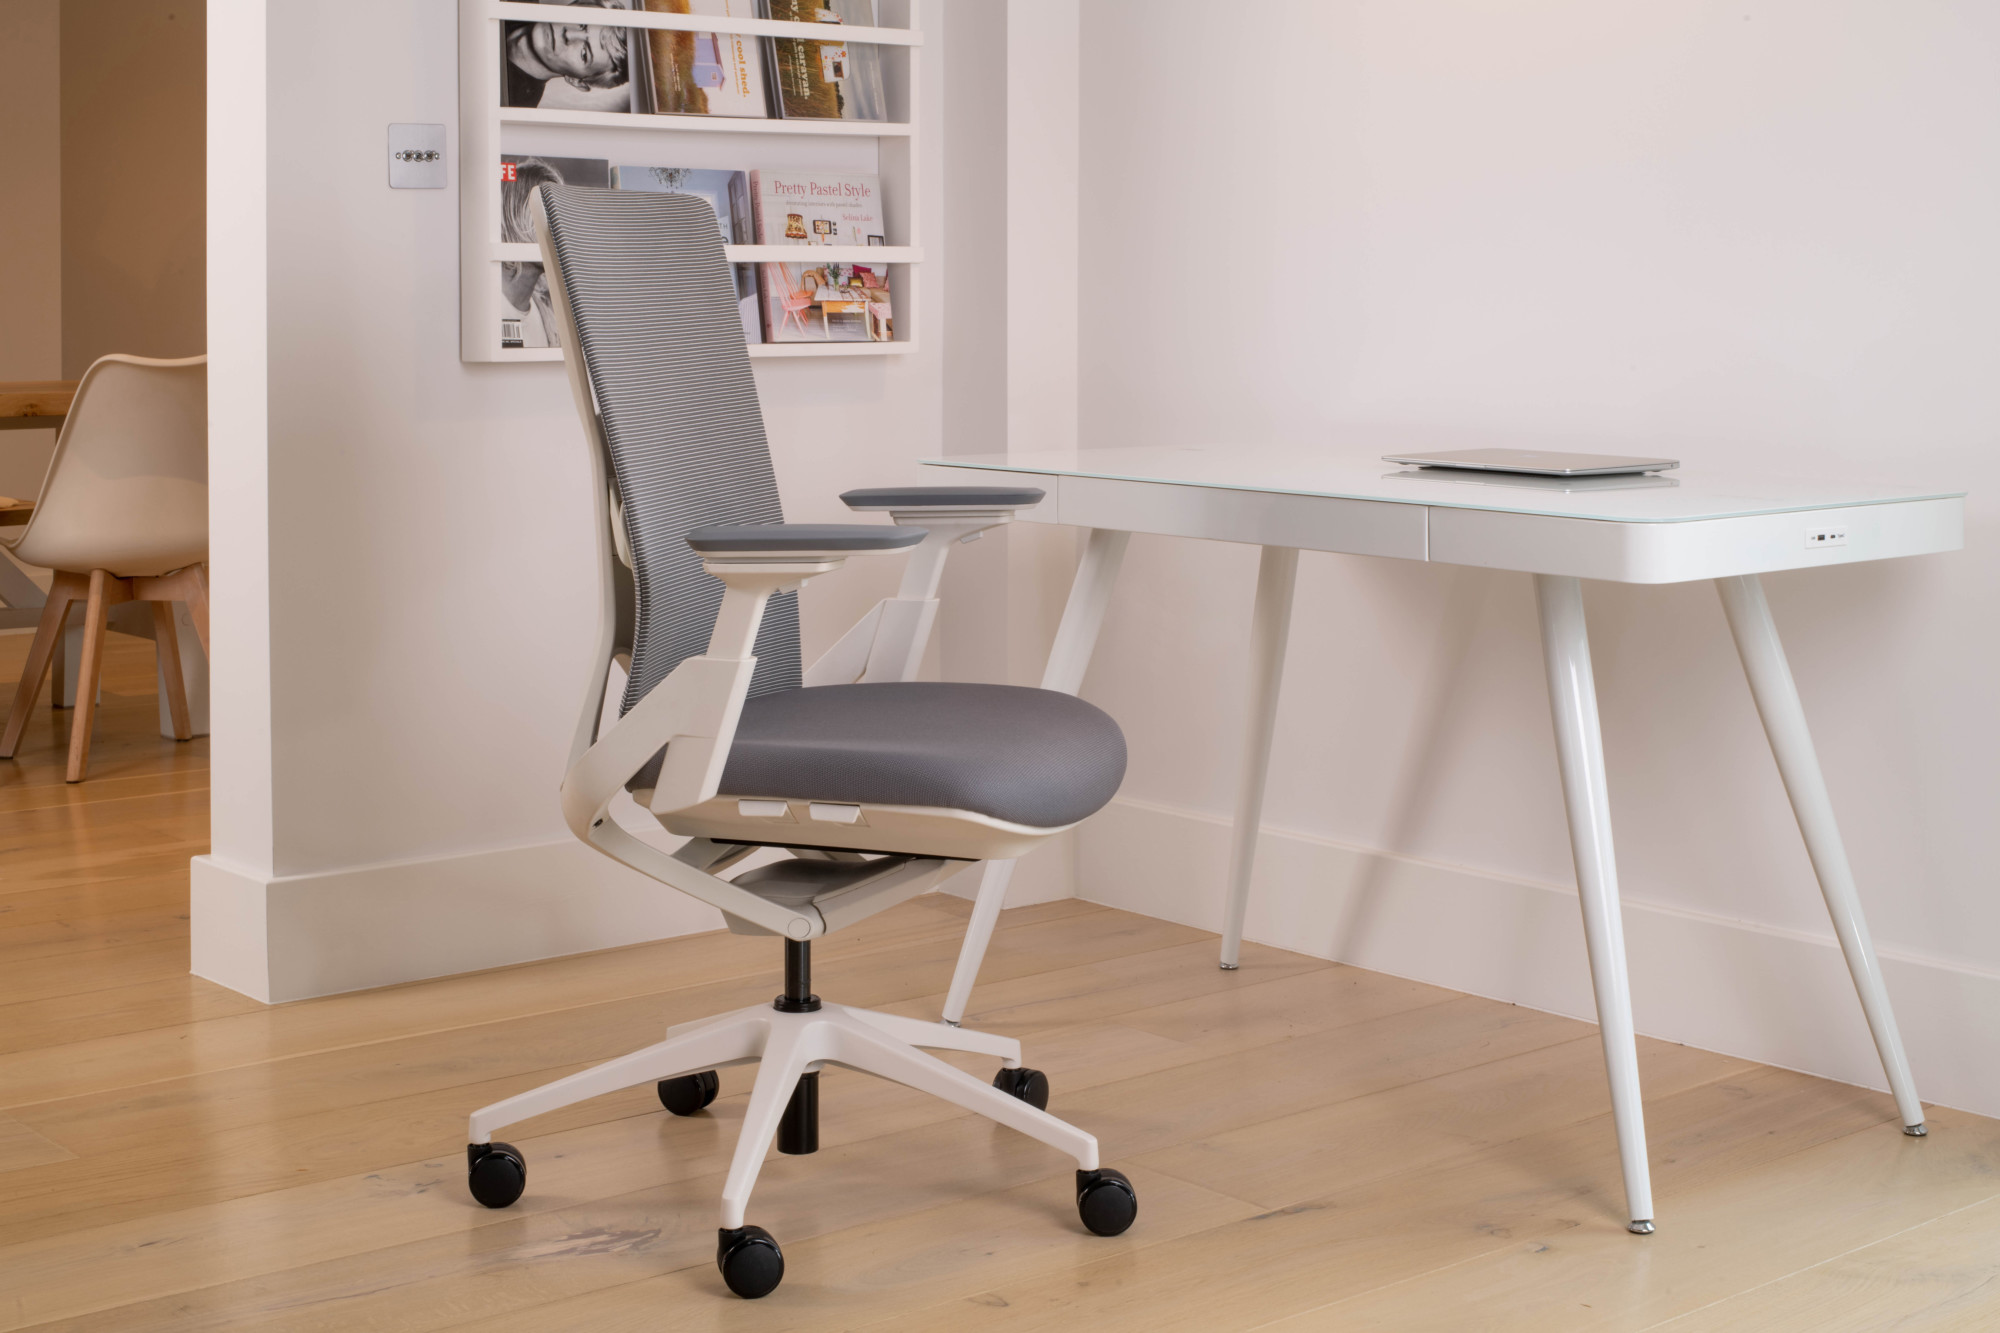 Maja a fully ergonomic 24 hour rated contemporary home office chair with Italian mesh and a stylish wish bone back detailing. 